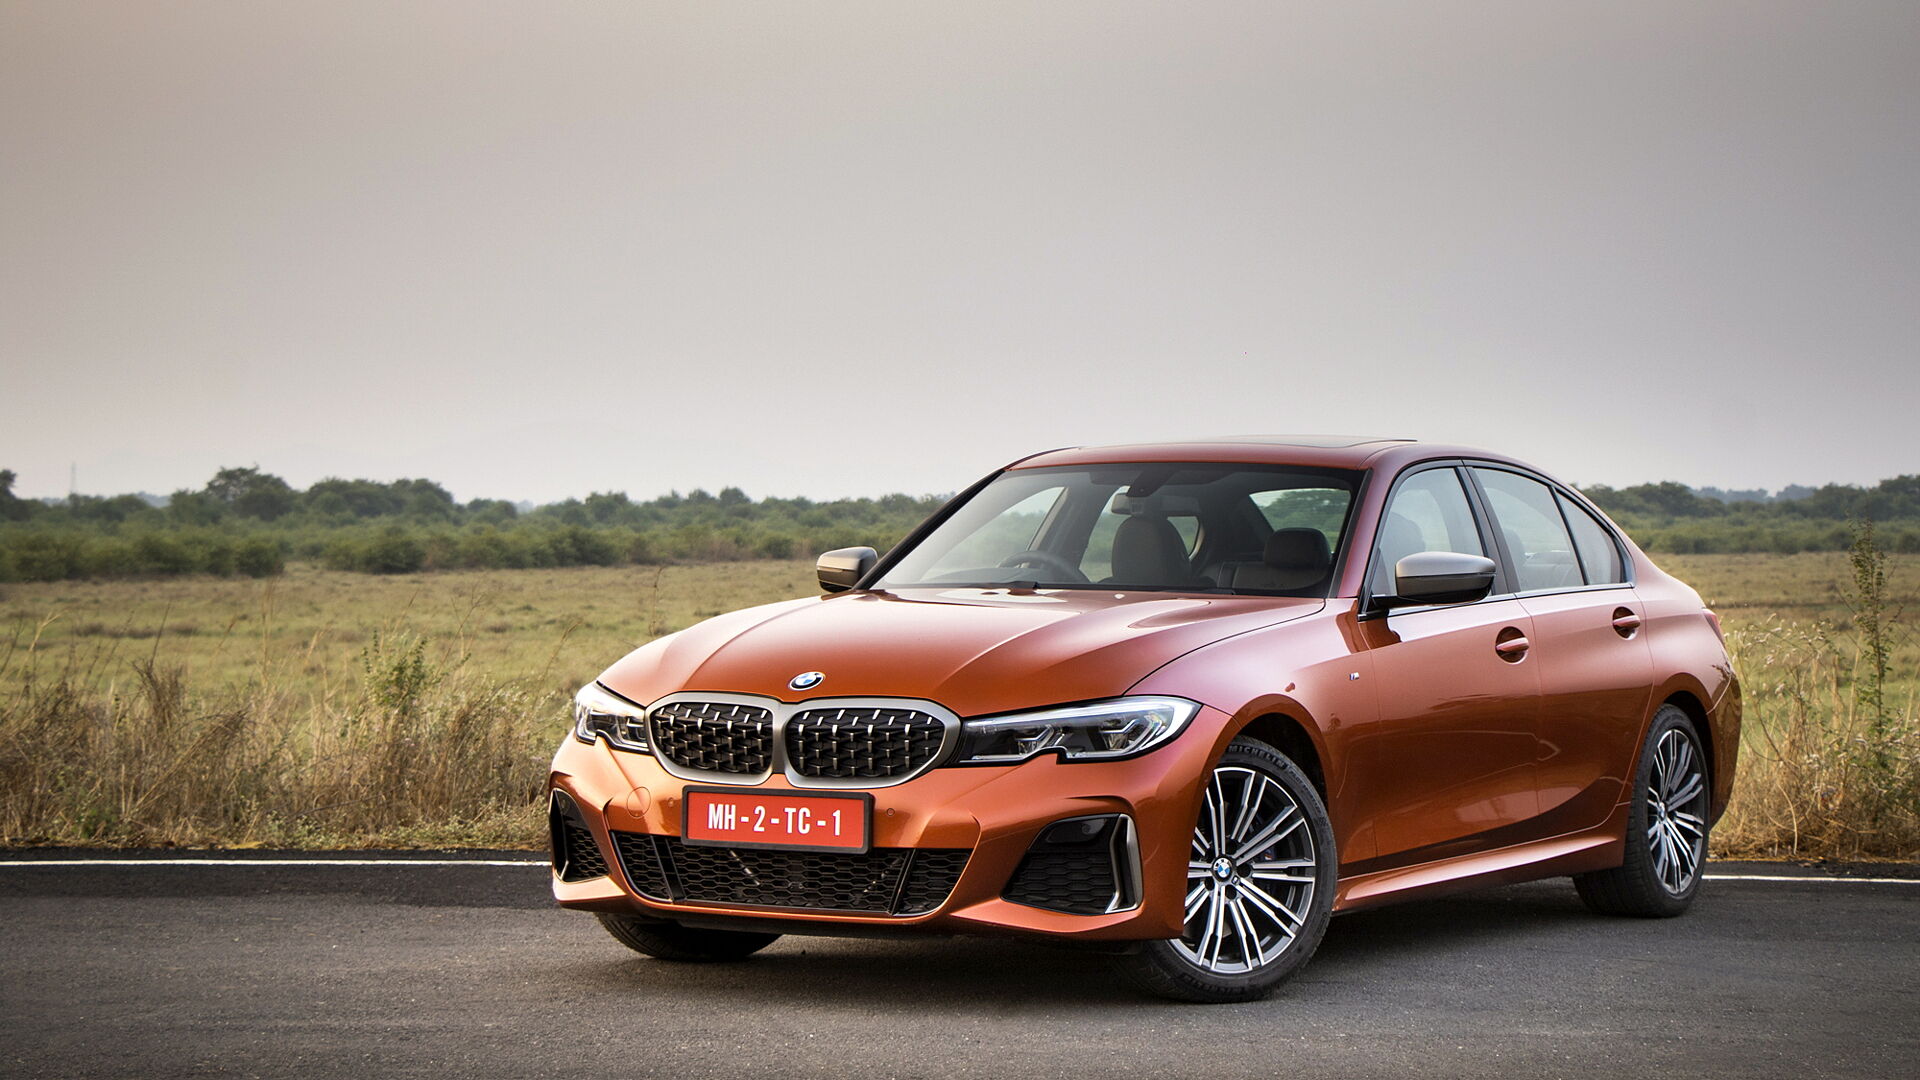 BMW Used Car: Should You Buy the 3 Series at the Price of a Honda